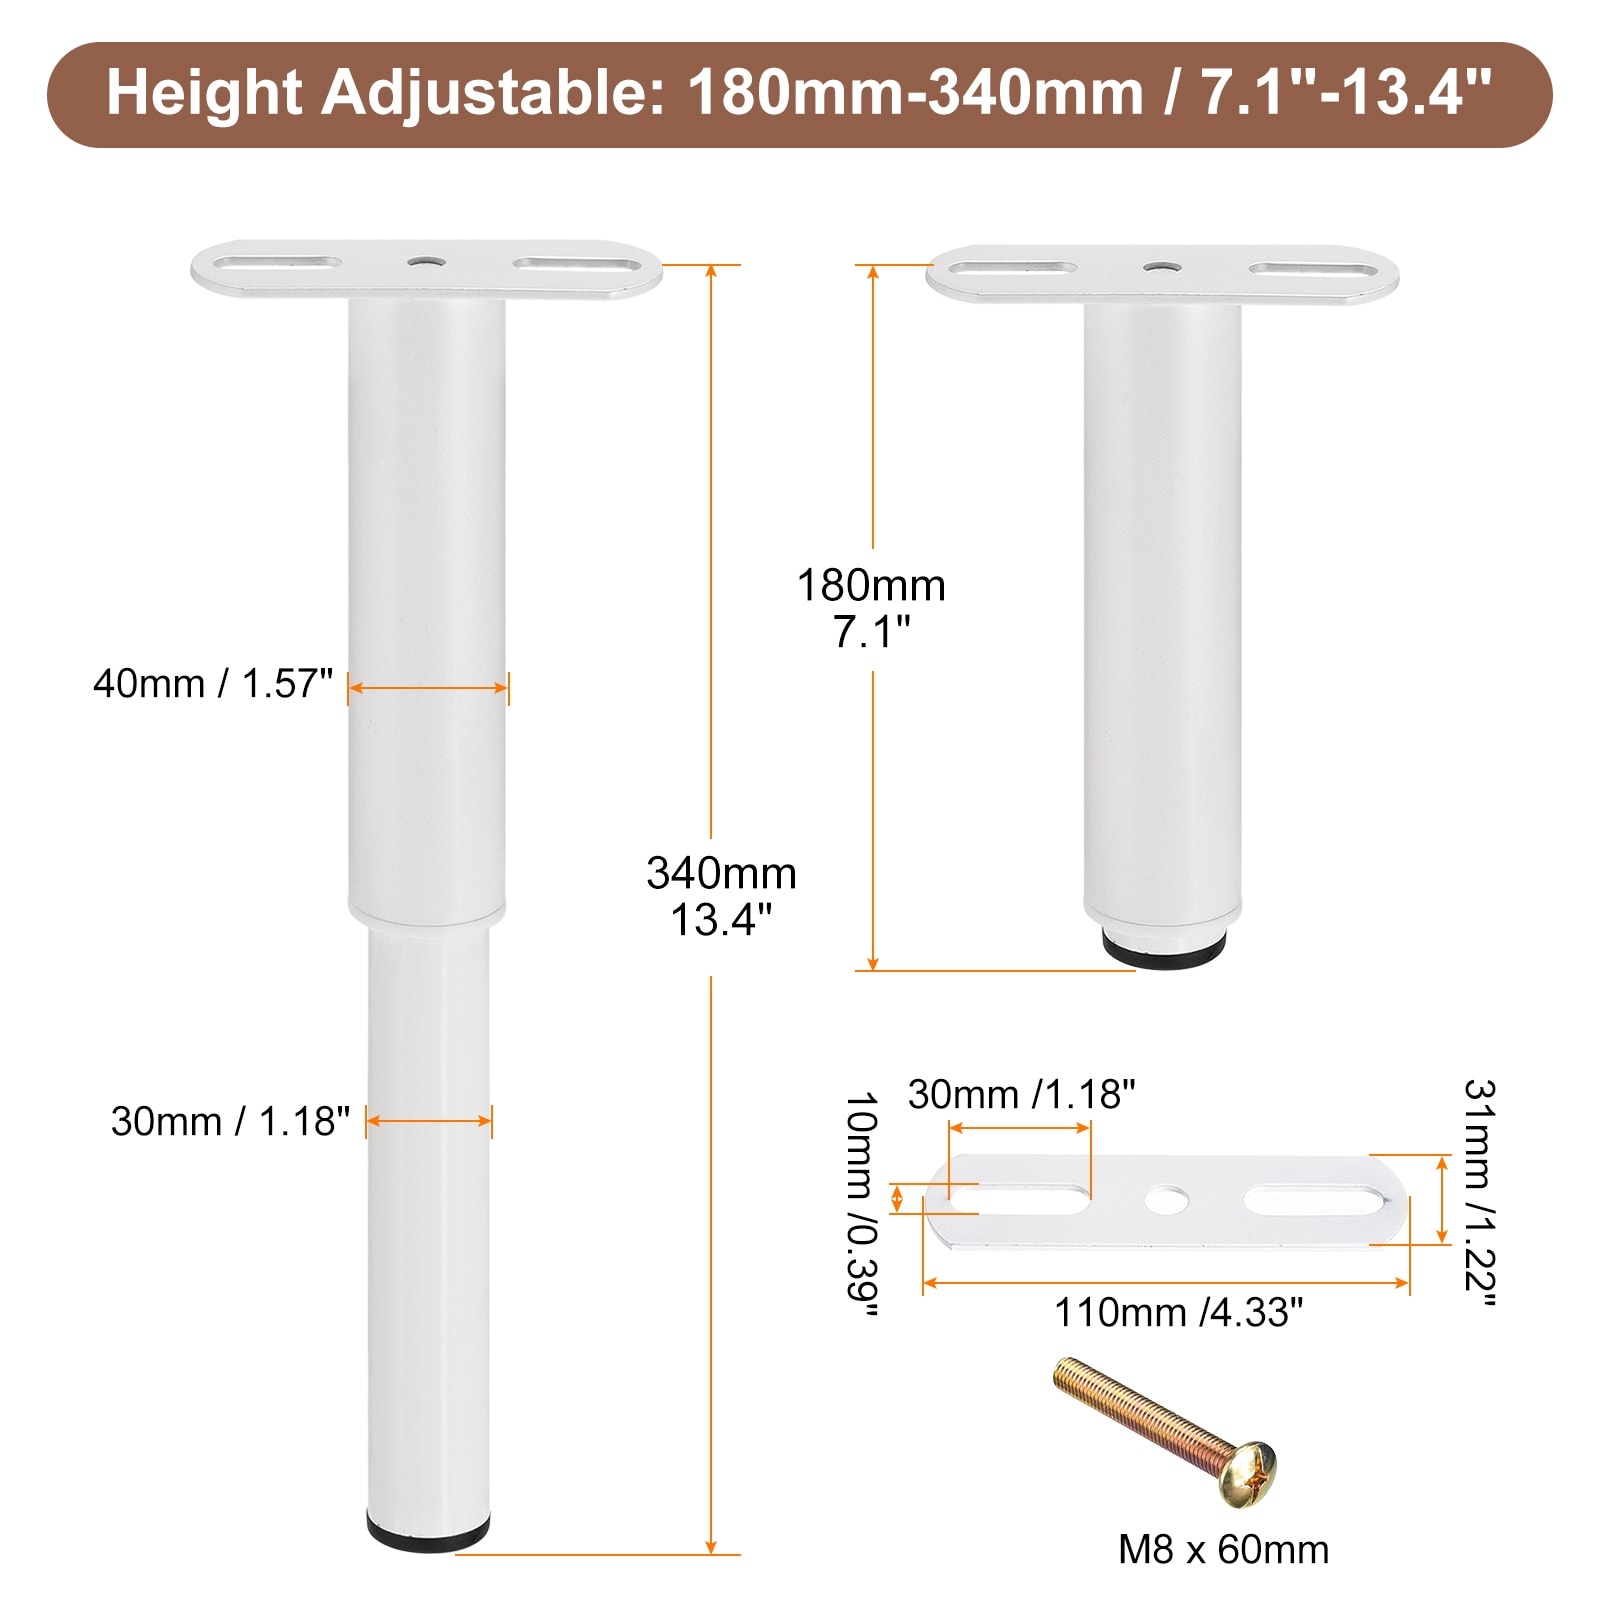 Adjustable Height Bed Frame Support Legs, 180mm-340mm/7.1"-13.4"